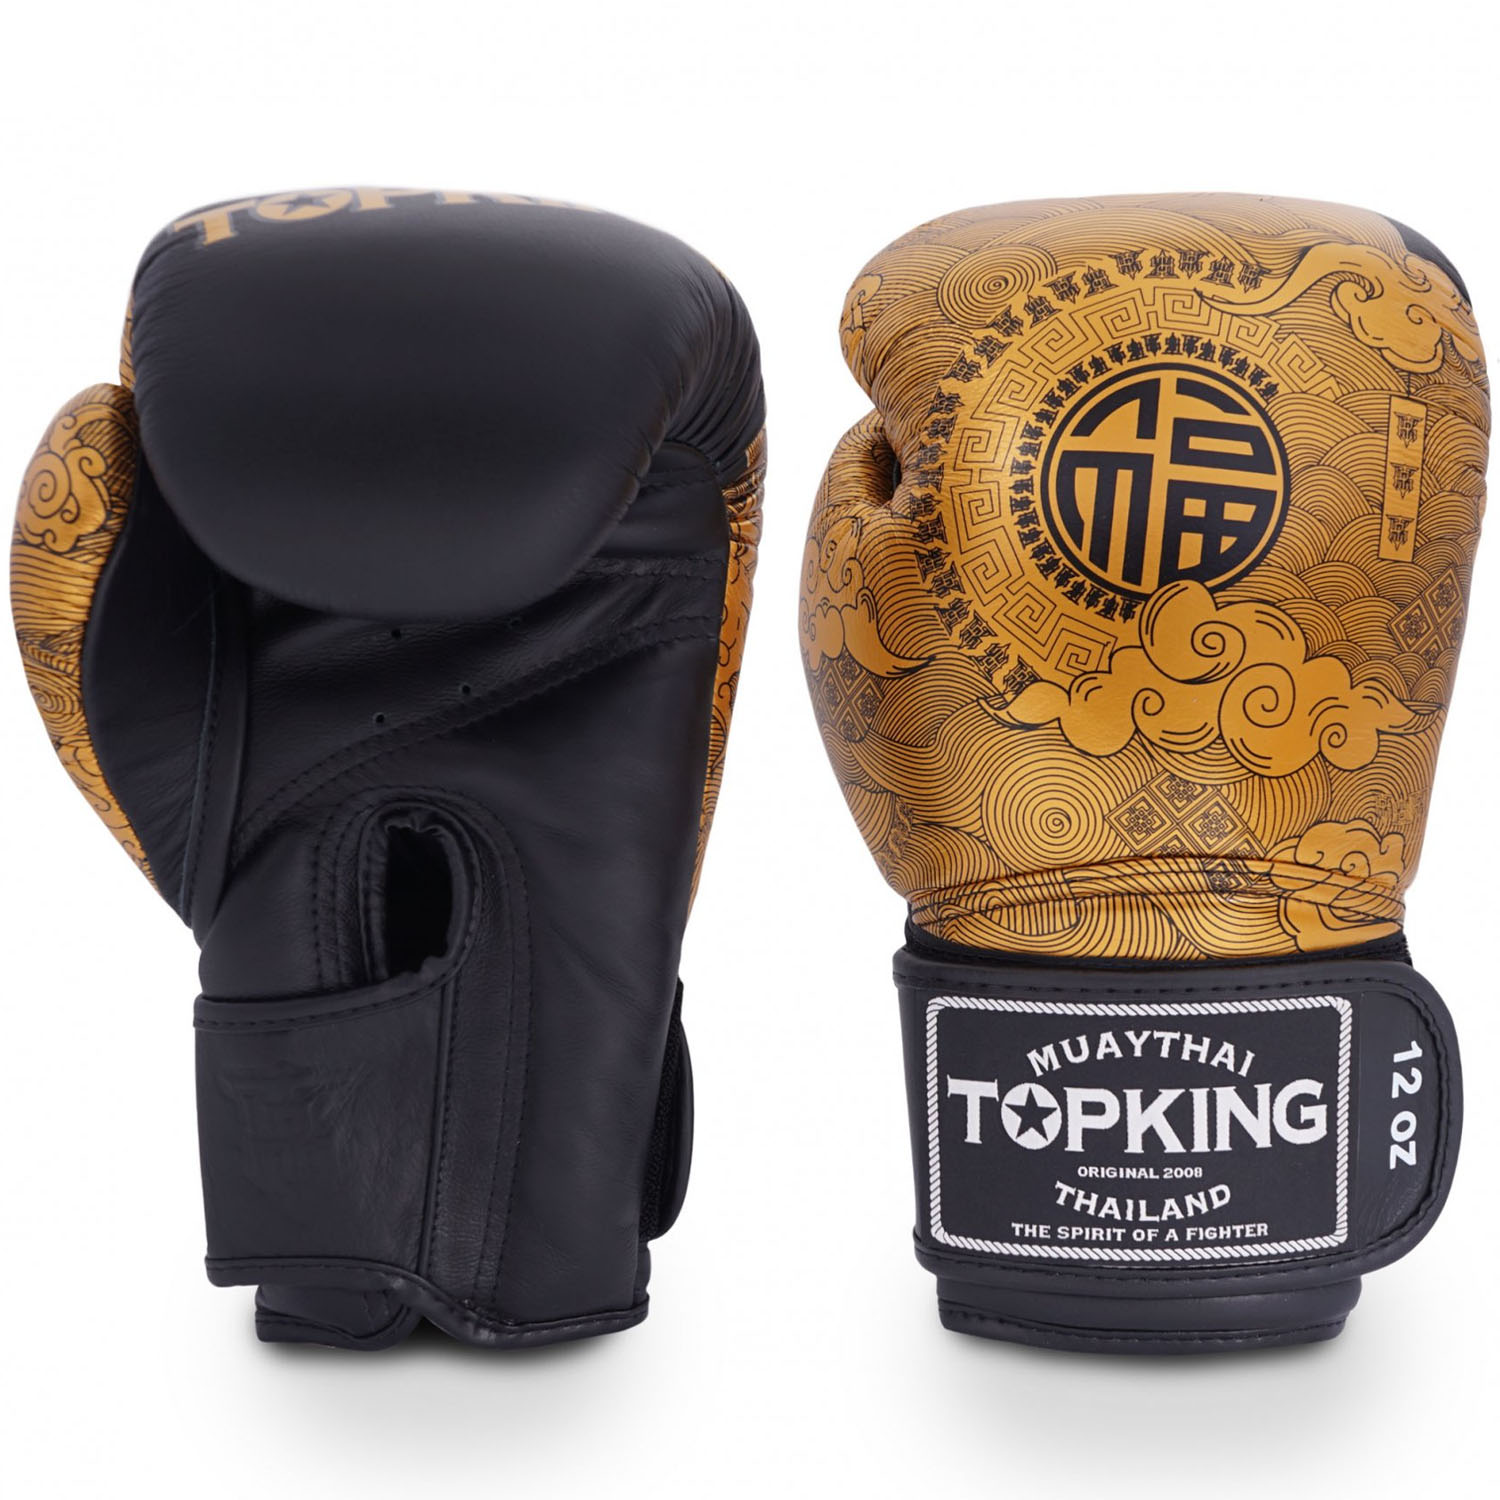 TOP KING BOXING Boxhandschuhe, Happiness Chinese, gold-schwarz